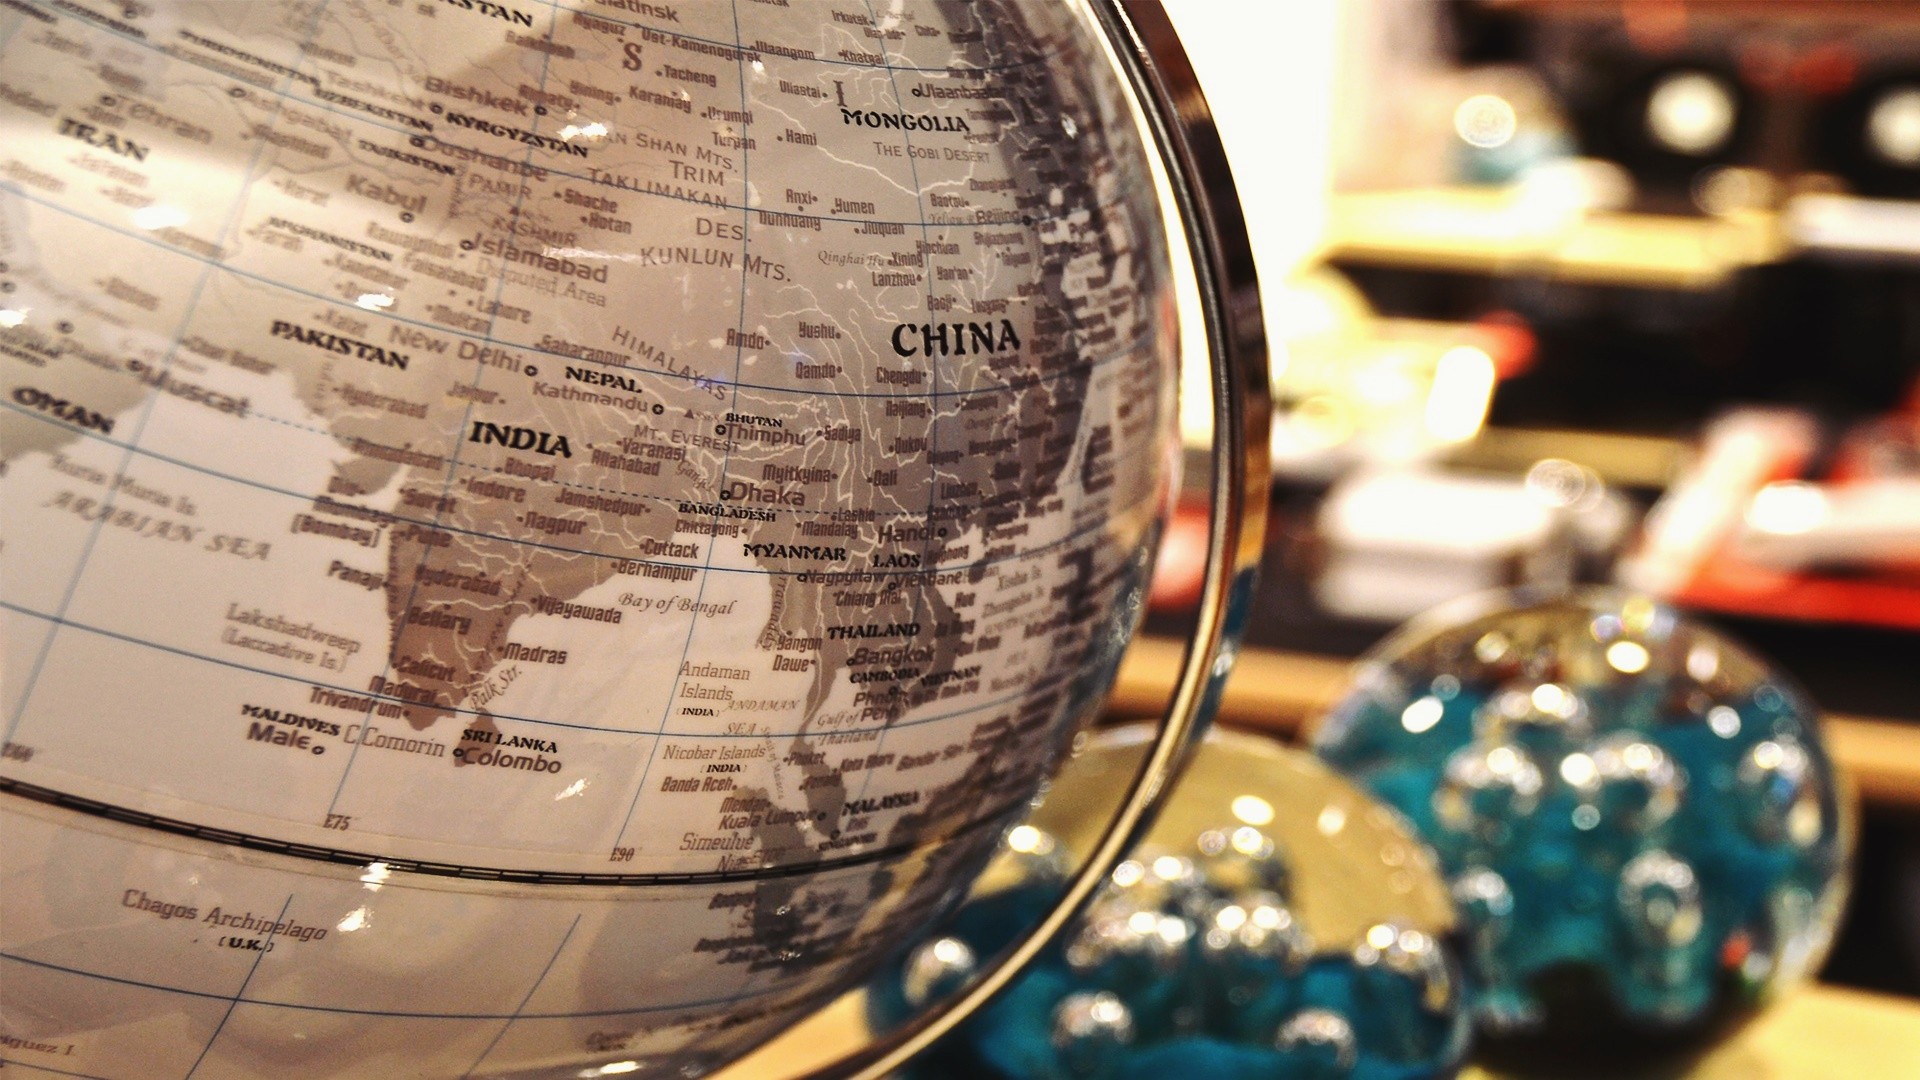 General 1920x1080 China world map globes geography cartography